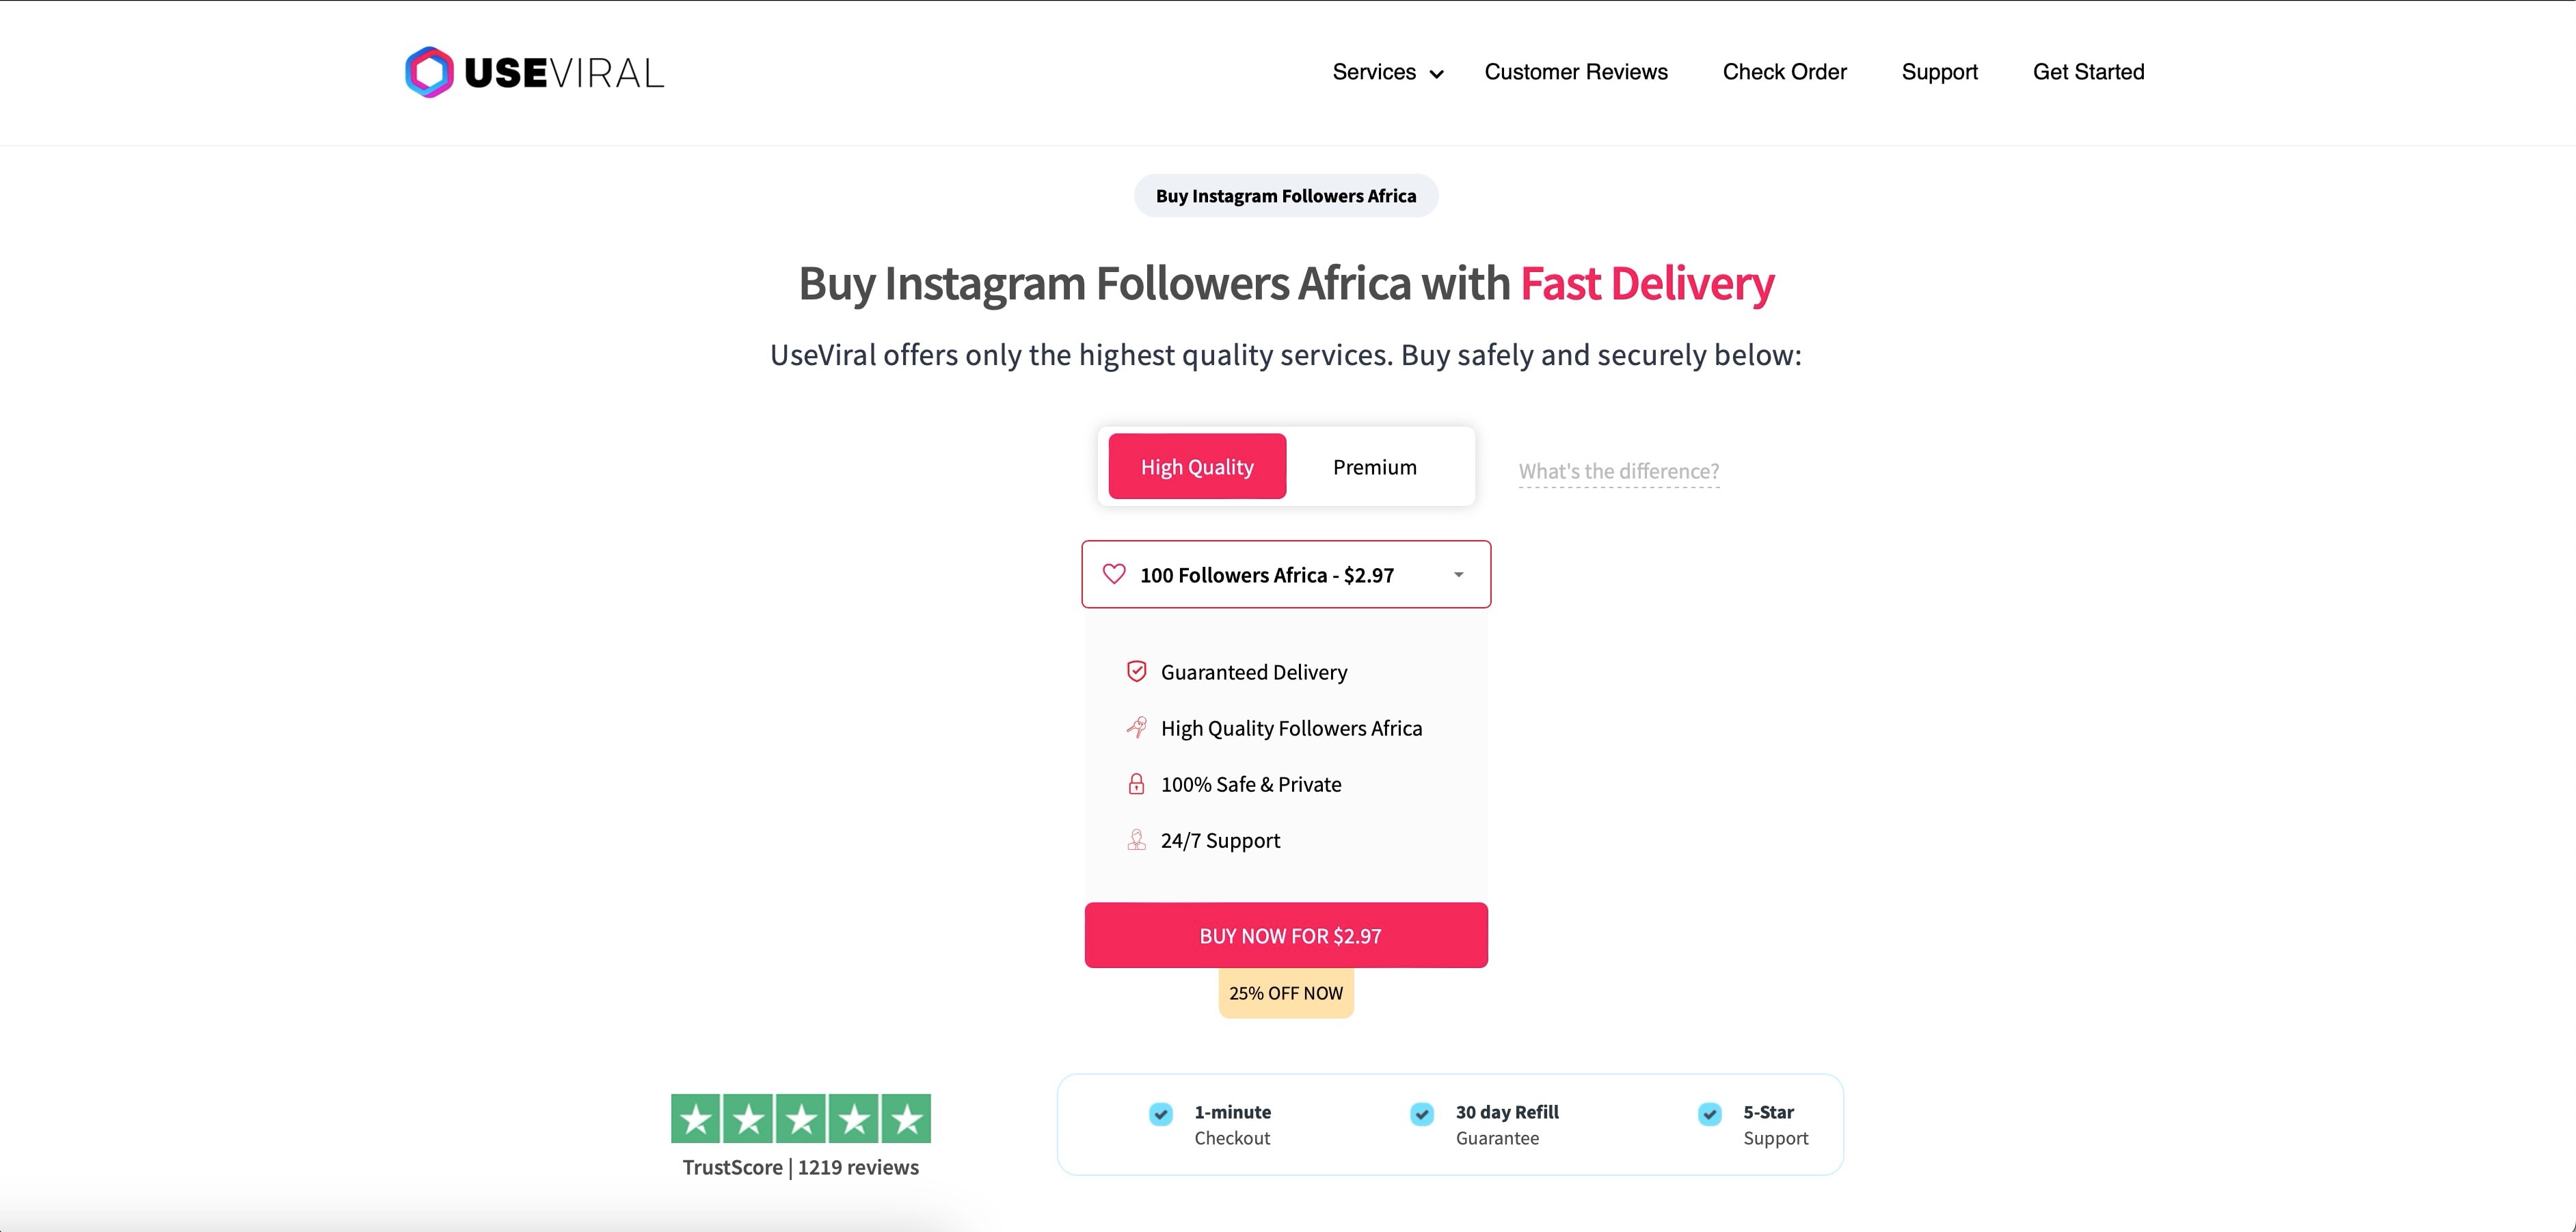 useviral buy instagram followers africa page